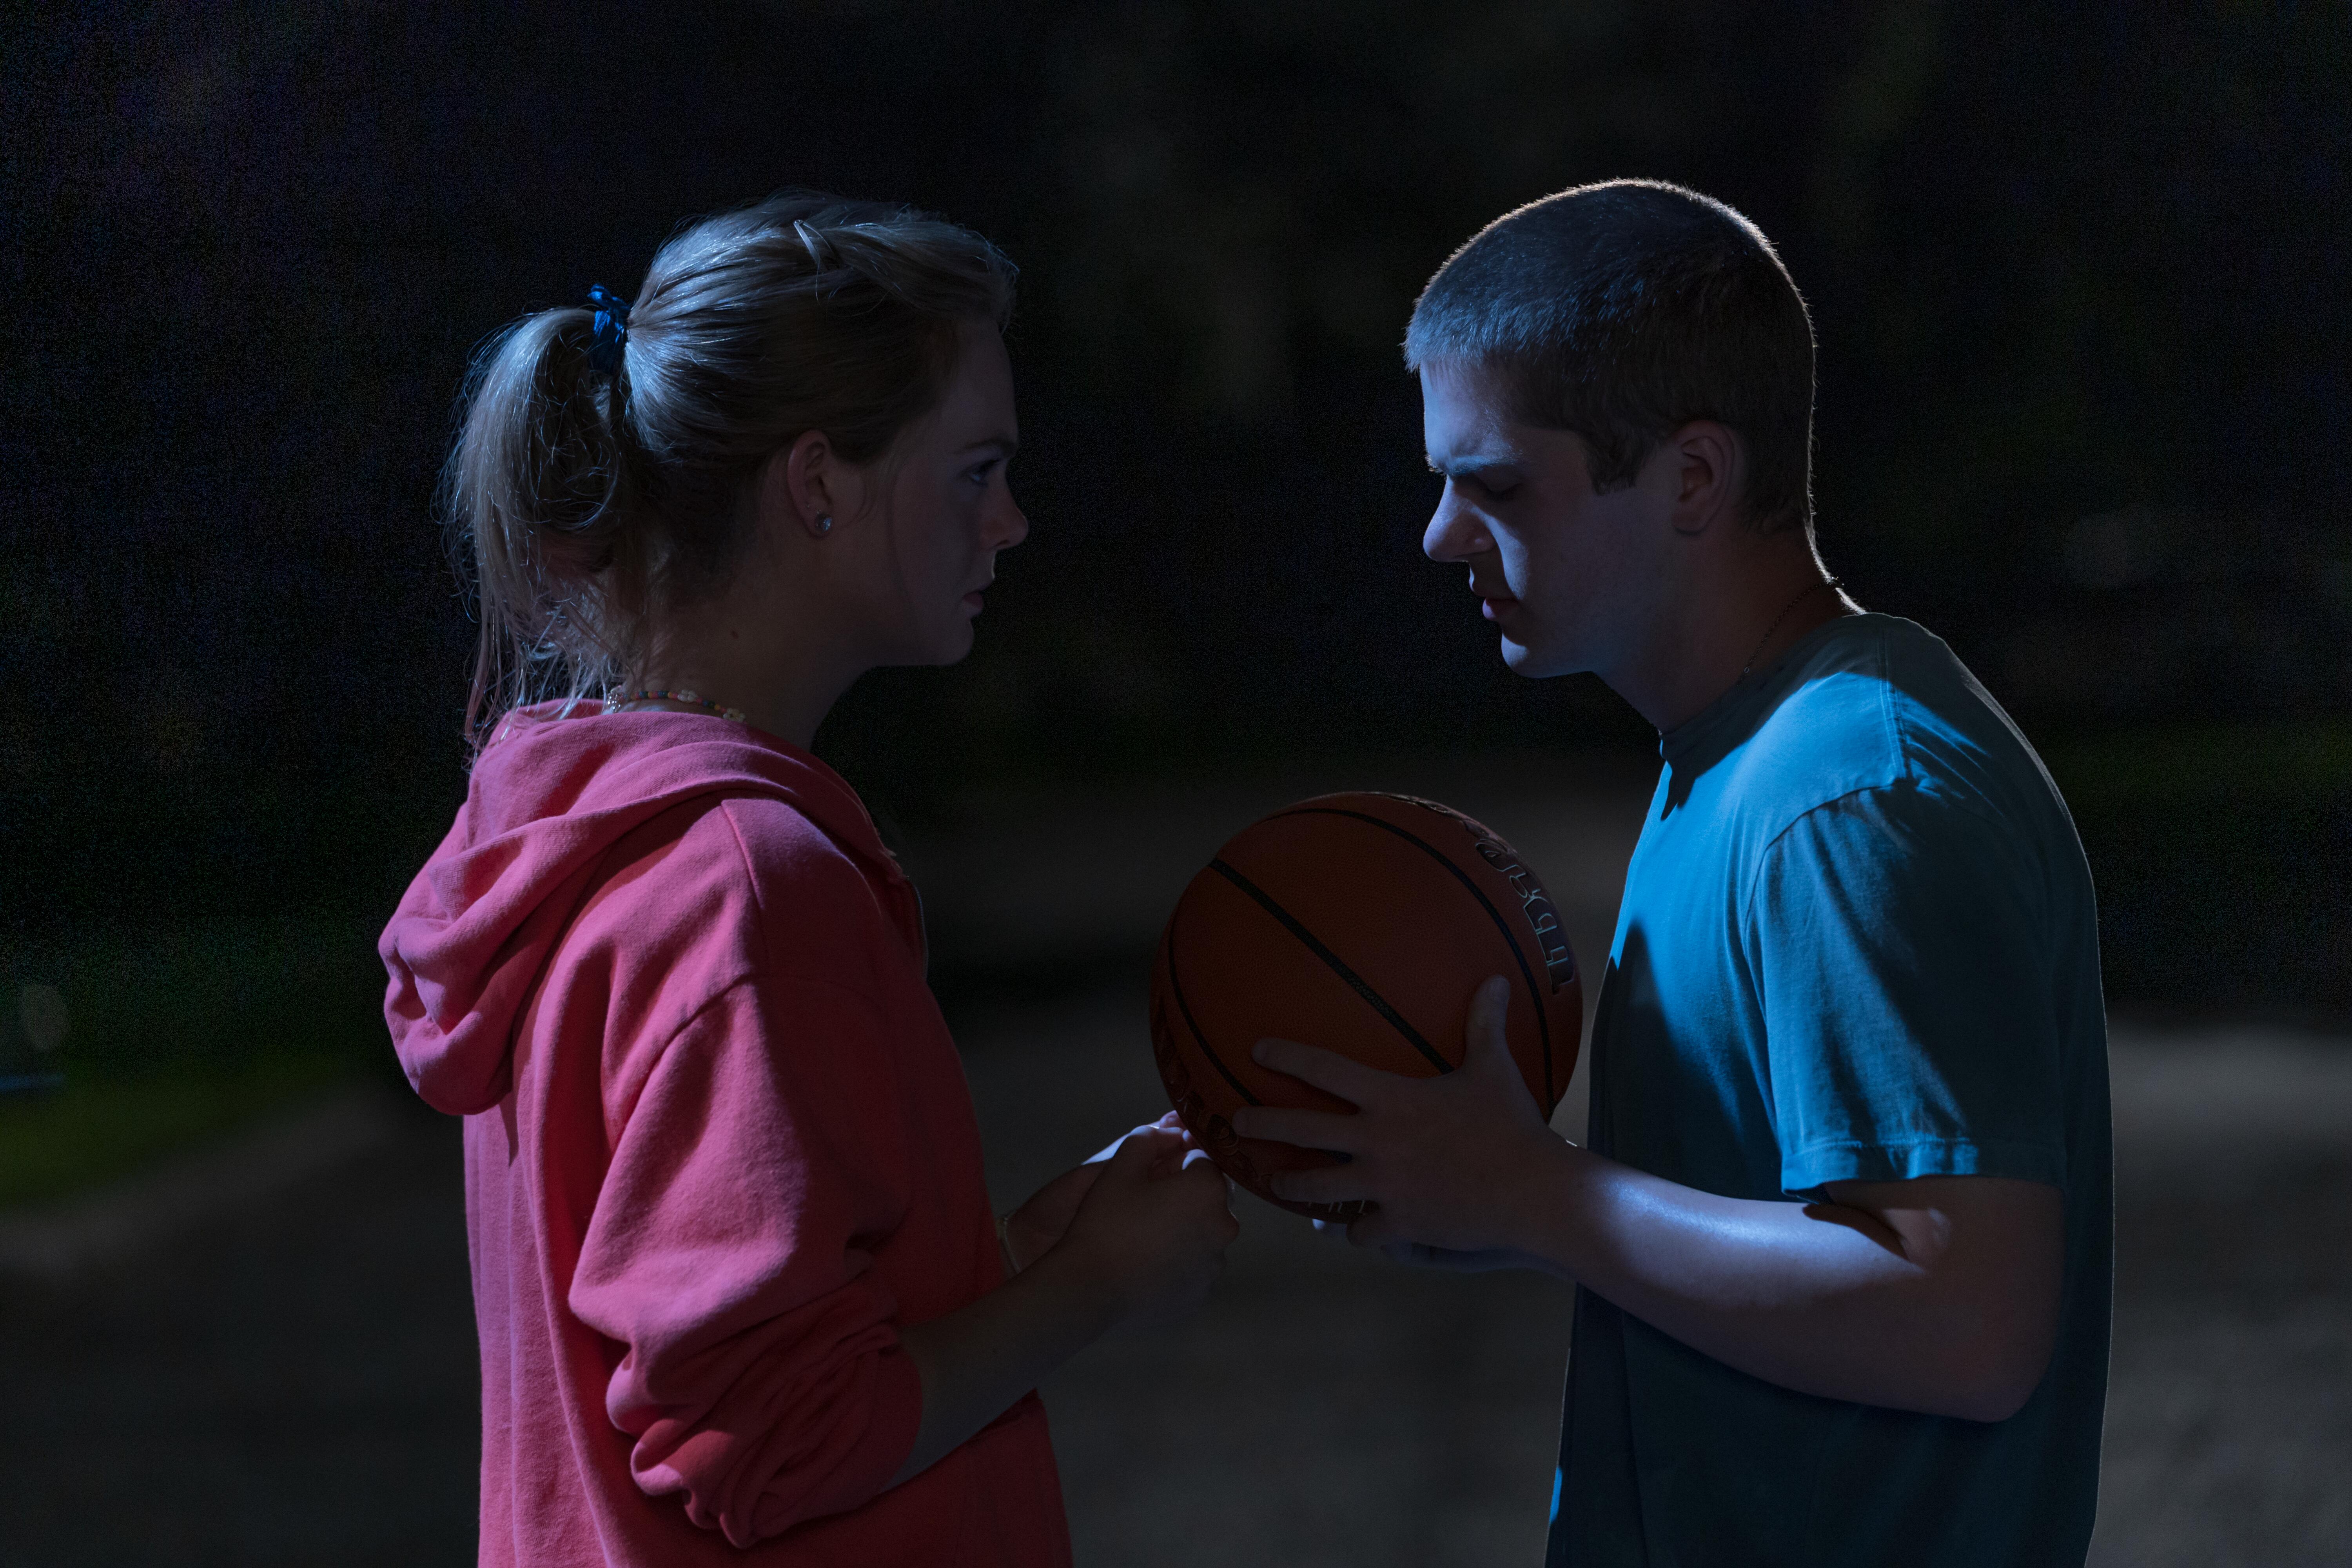 Elle Fanning and Colton Ryan standing across from each other with the latter holding a basketball